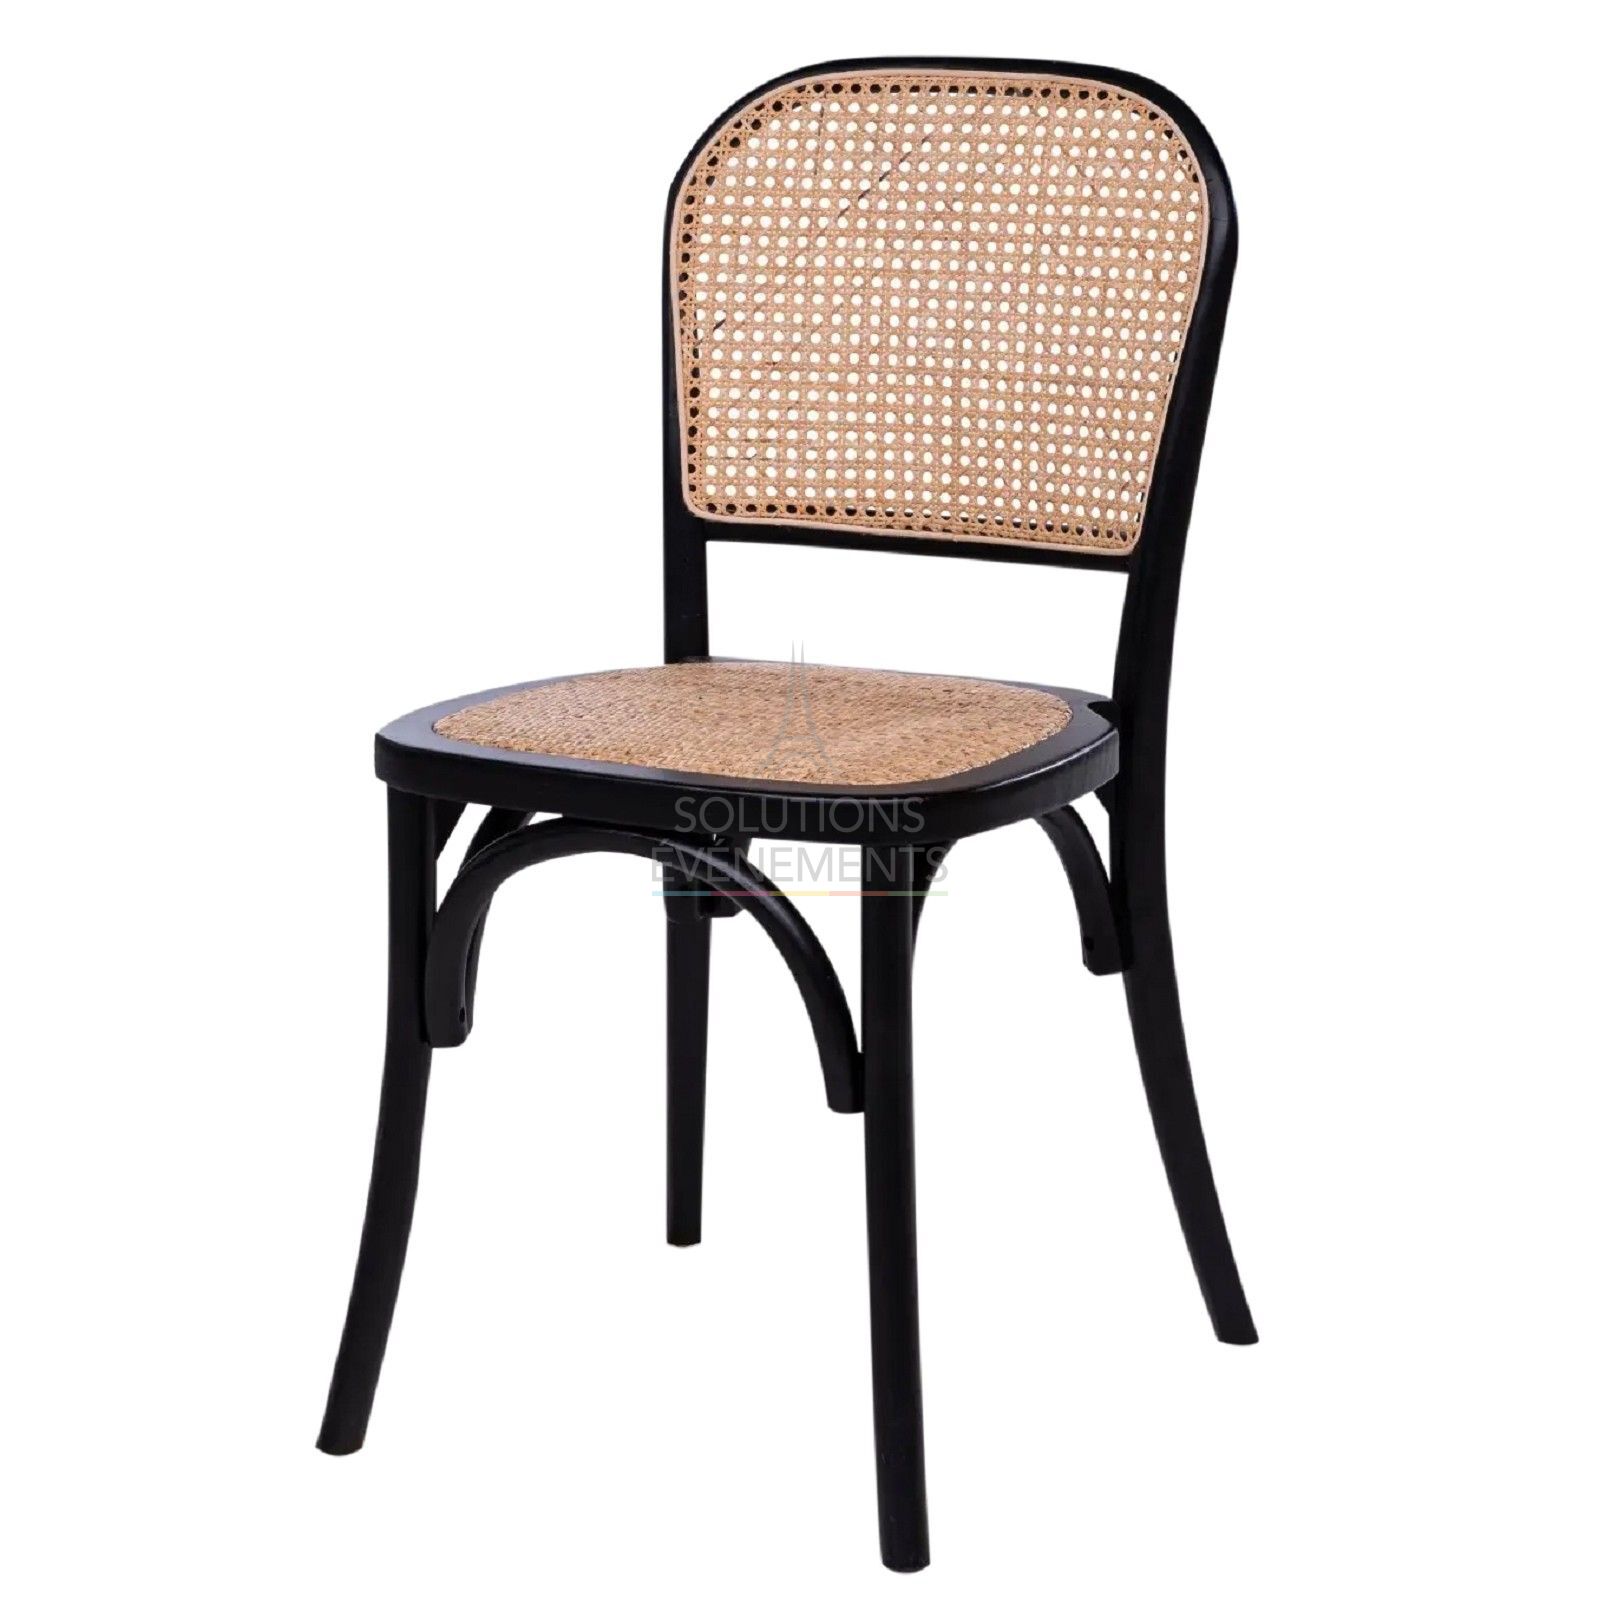 Rental stackable chair in beige and black canework